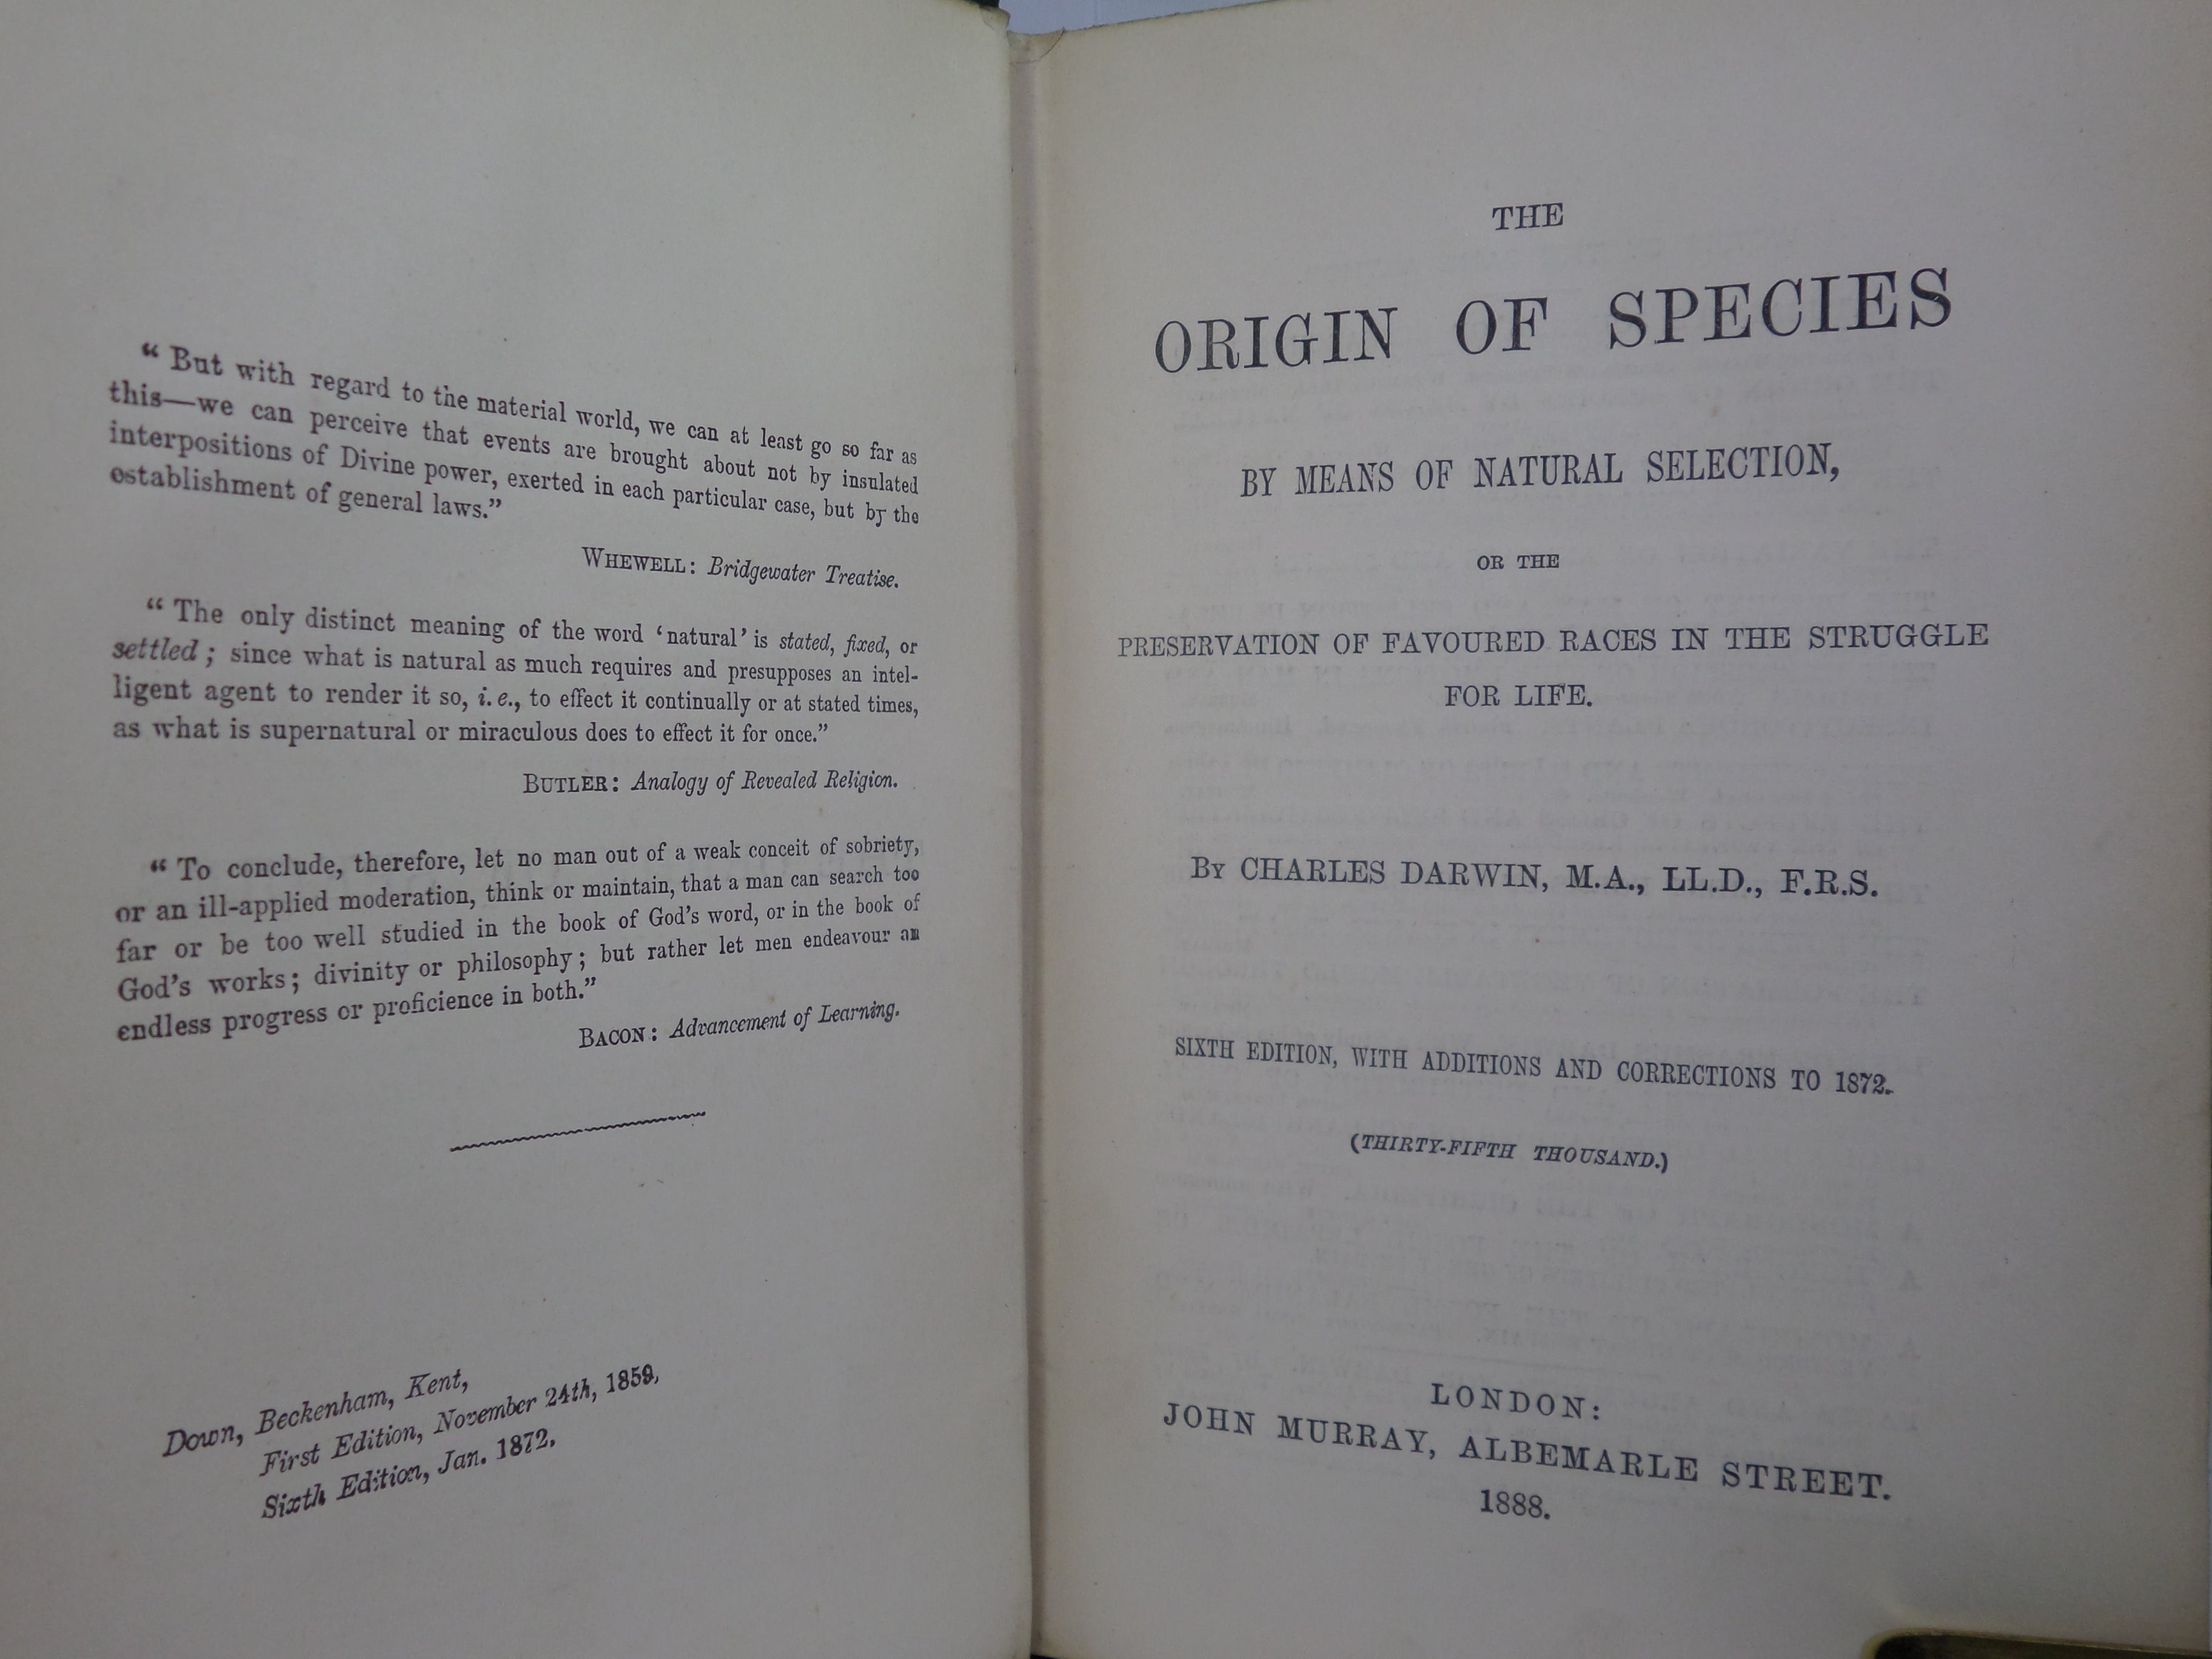 THE ORIGIN OF SPECIES BY MEANS OF NATURAL SELECTION BY CHARLES DARWIN 1888